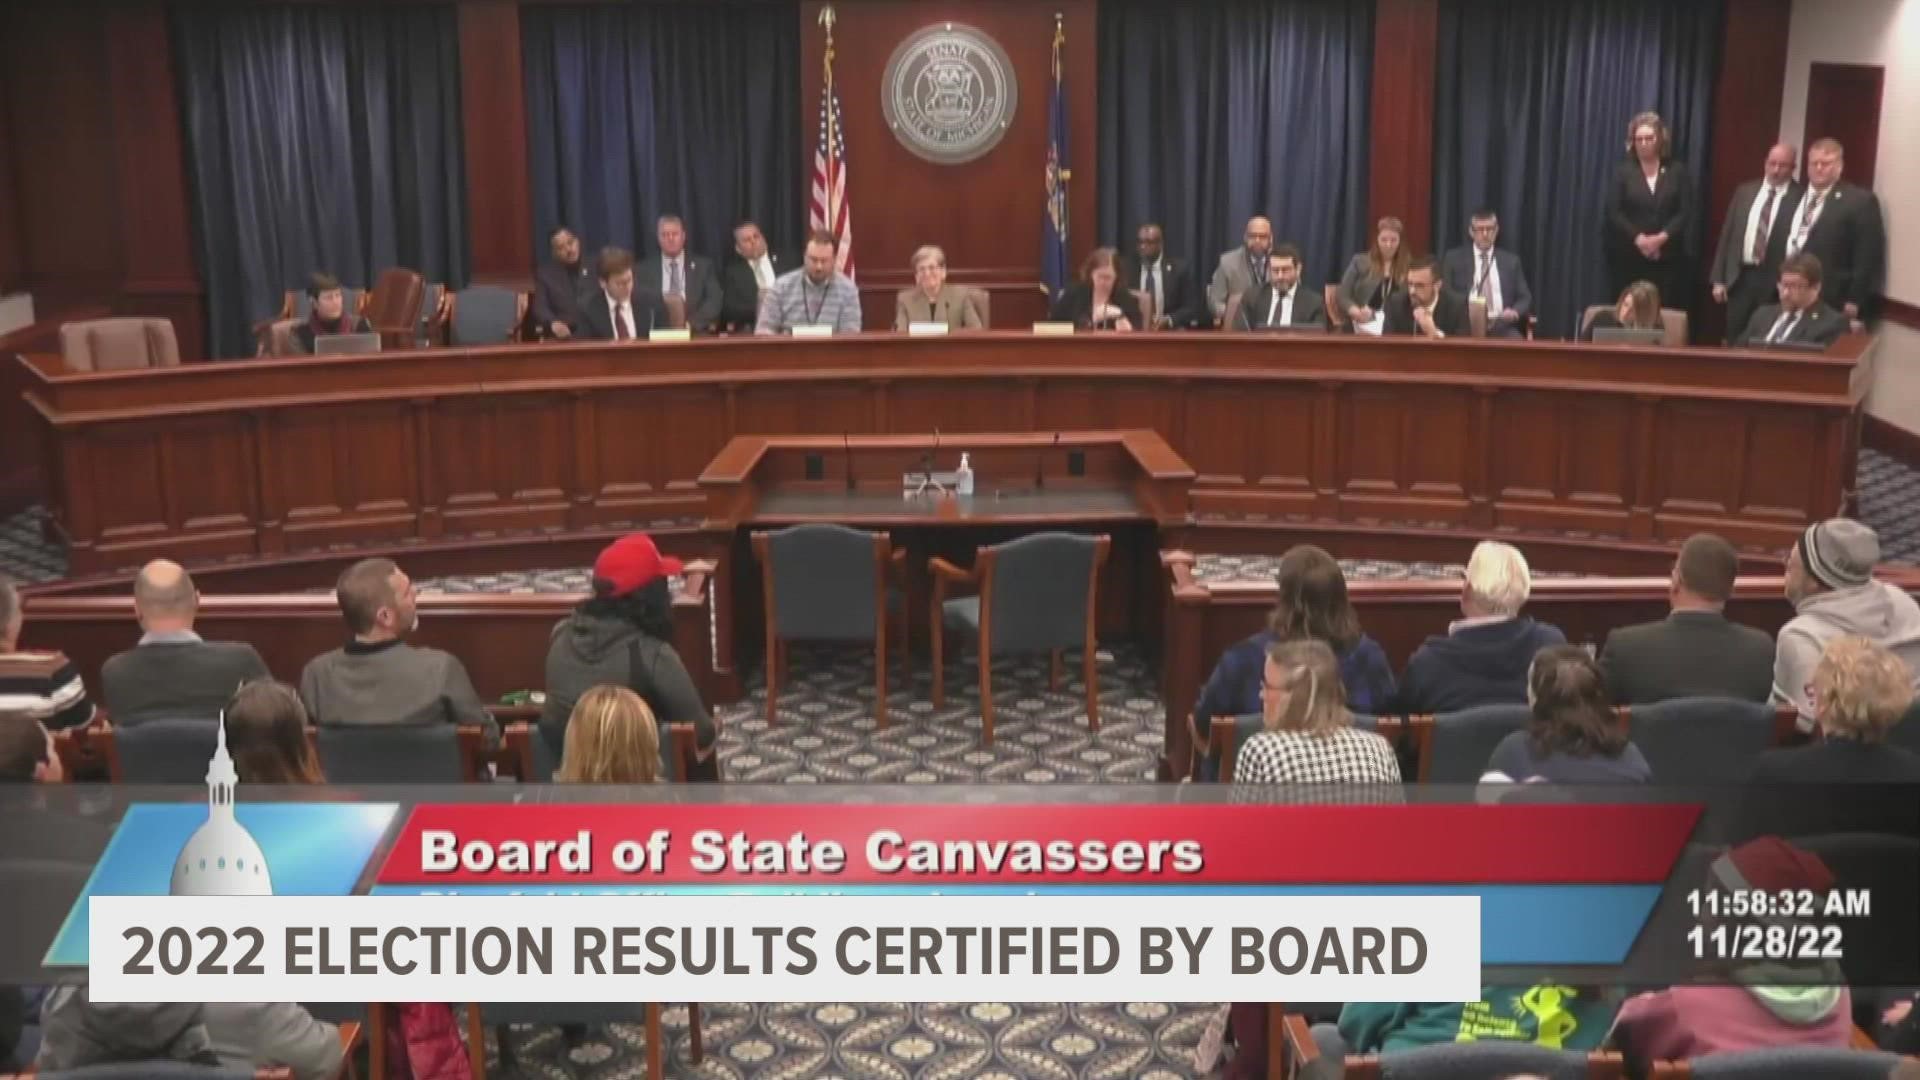 Michigan's Board of Canvassers has certified the November 2022 election results.